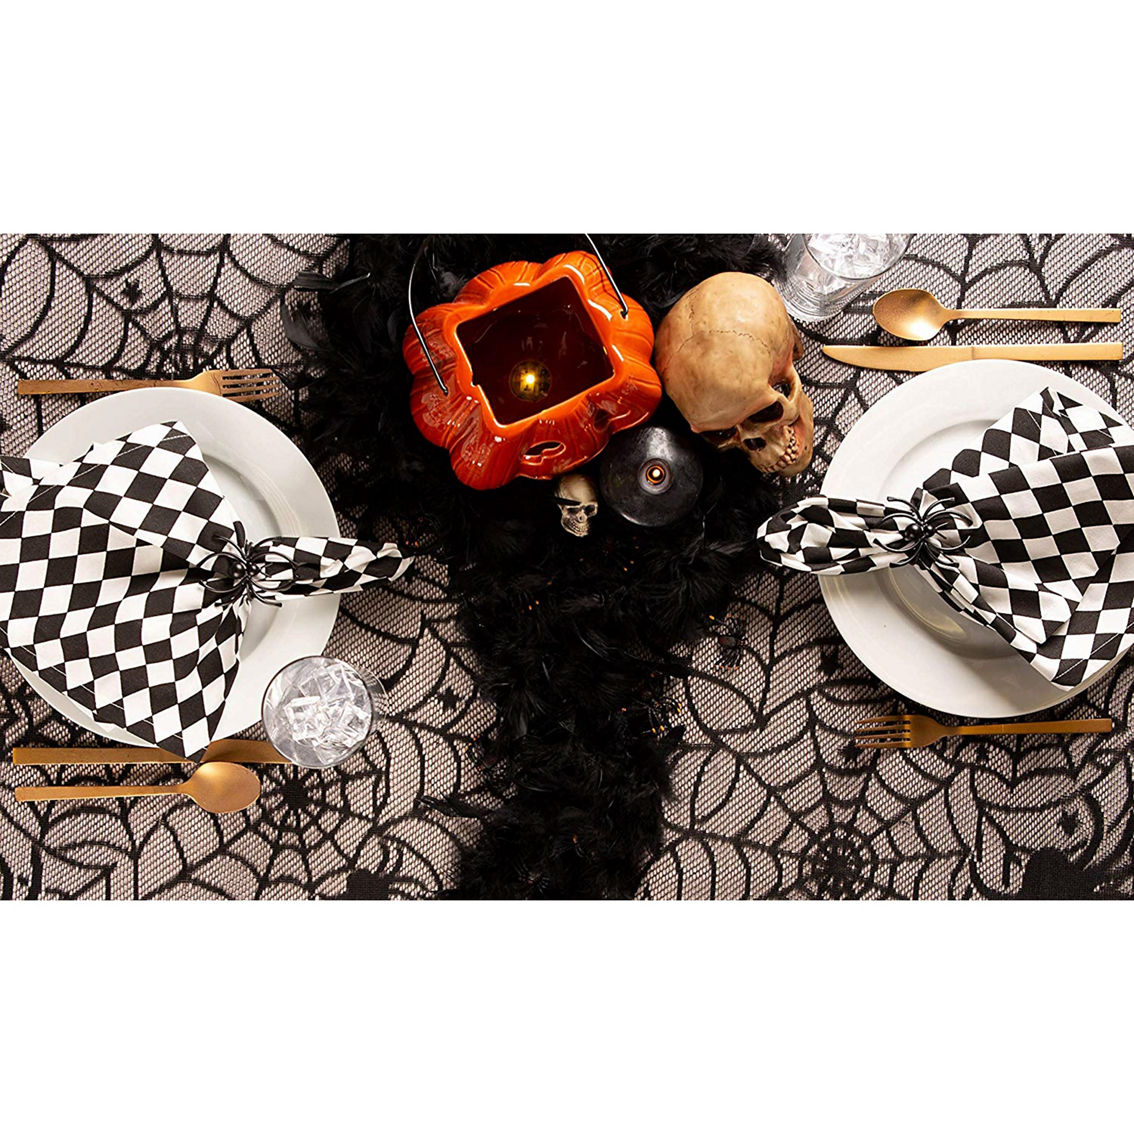 Design Imports 54 in. x 72 in. Halloween Lace Tablecloth - Image 5 of 9